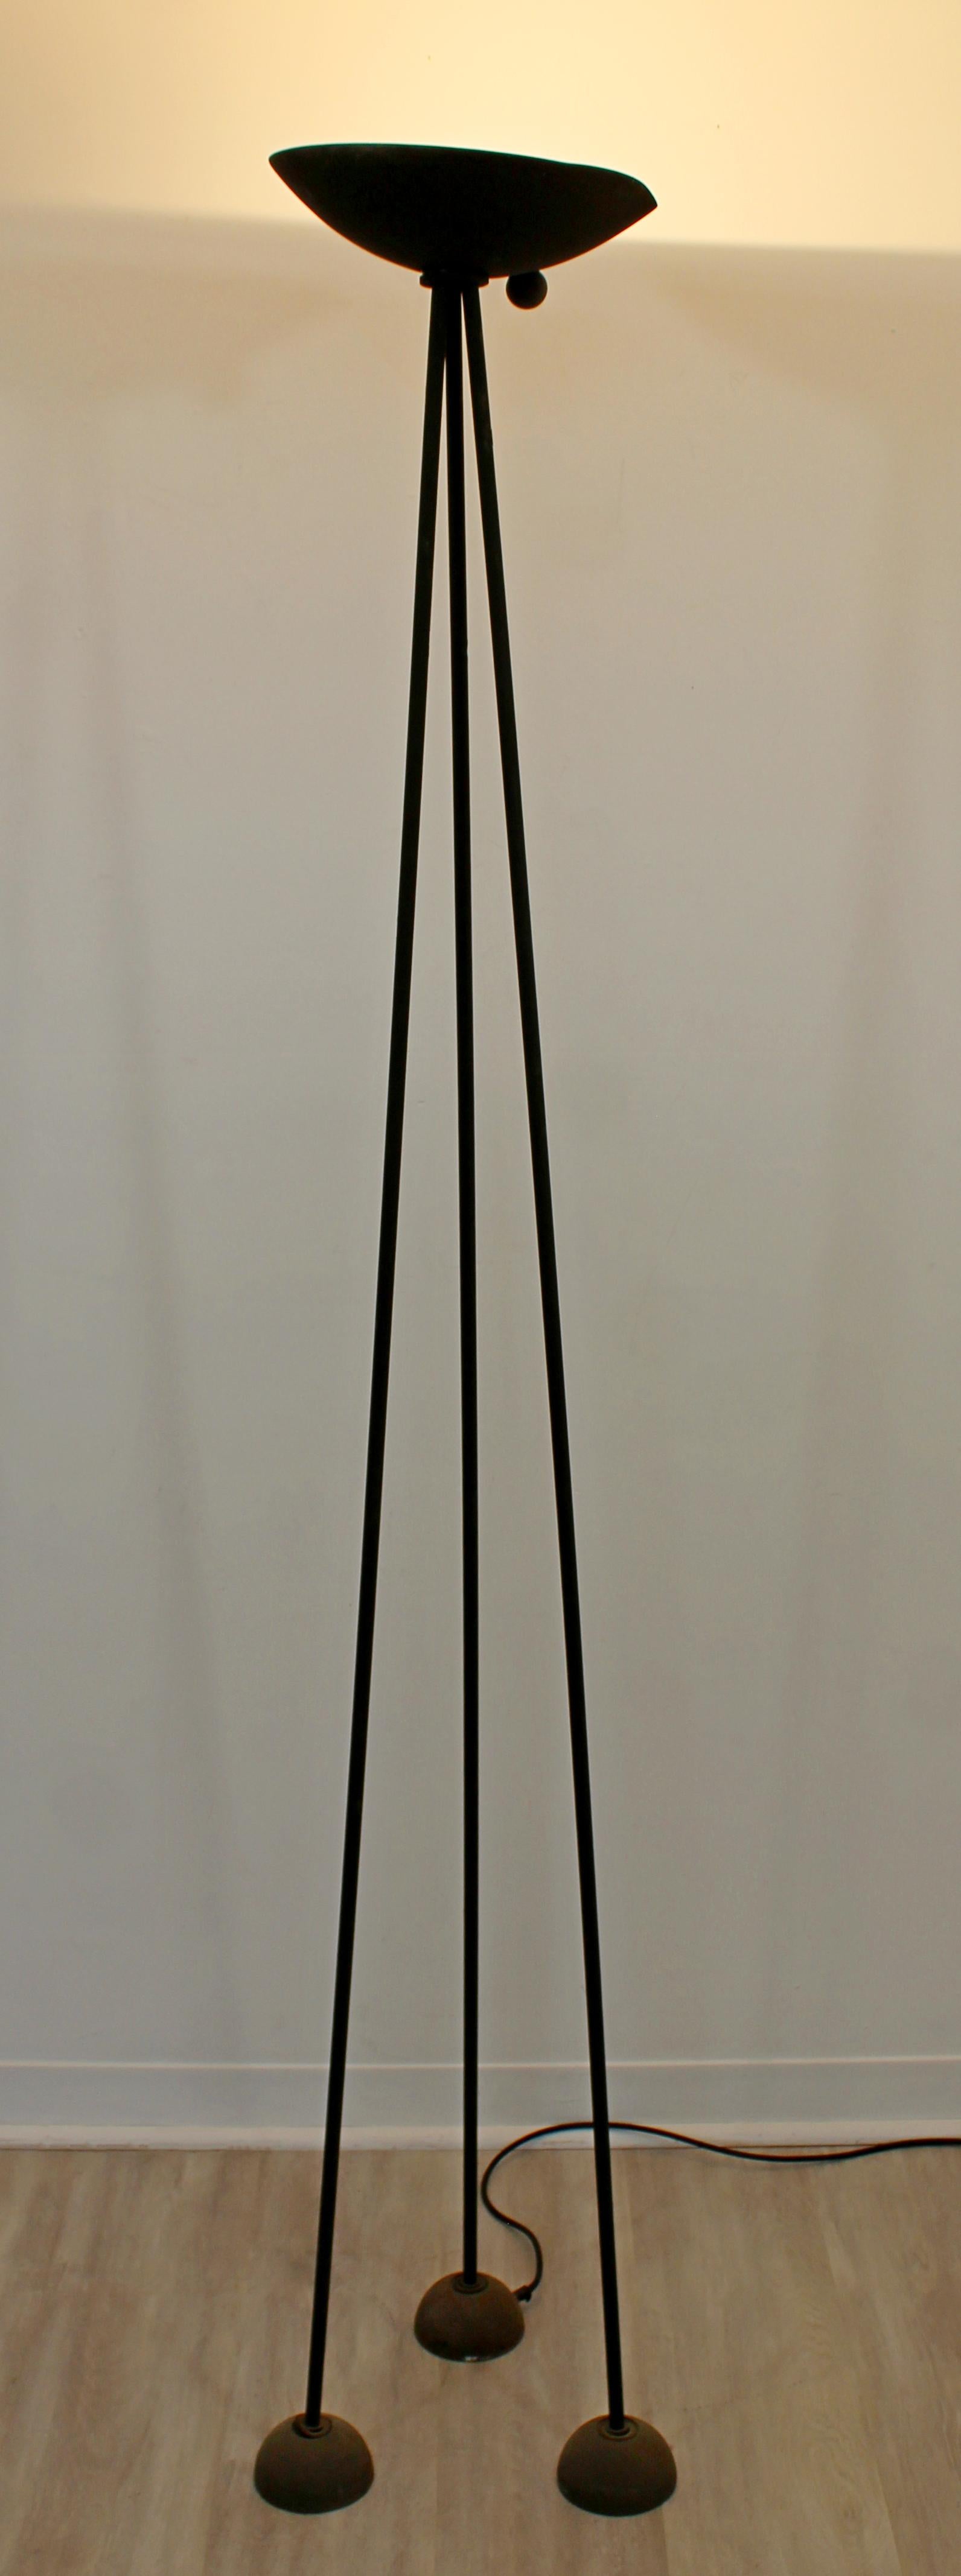 For your consideration is a fantastic tripod floor lamp, made of metal, designed by Koch & Lowy, circa 1980s. In vintage condition. The dimensions are 14